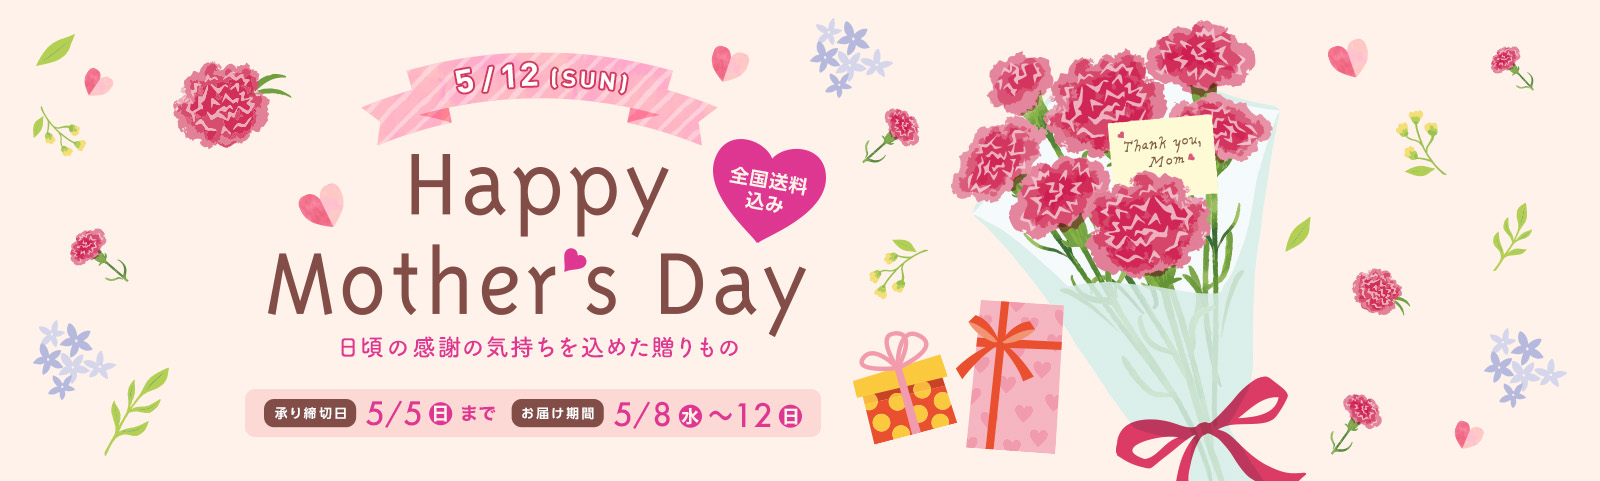 Happy Mother's Day 母の日 2024年5月12(日) 日頃の感謝の気持ちを込めた贈りもの 全国送料込み 承り締切日 5月5日（日）まで お届け期間 5月8日（水）～5月12日（日）